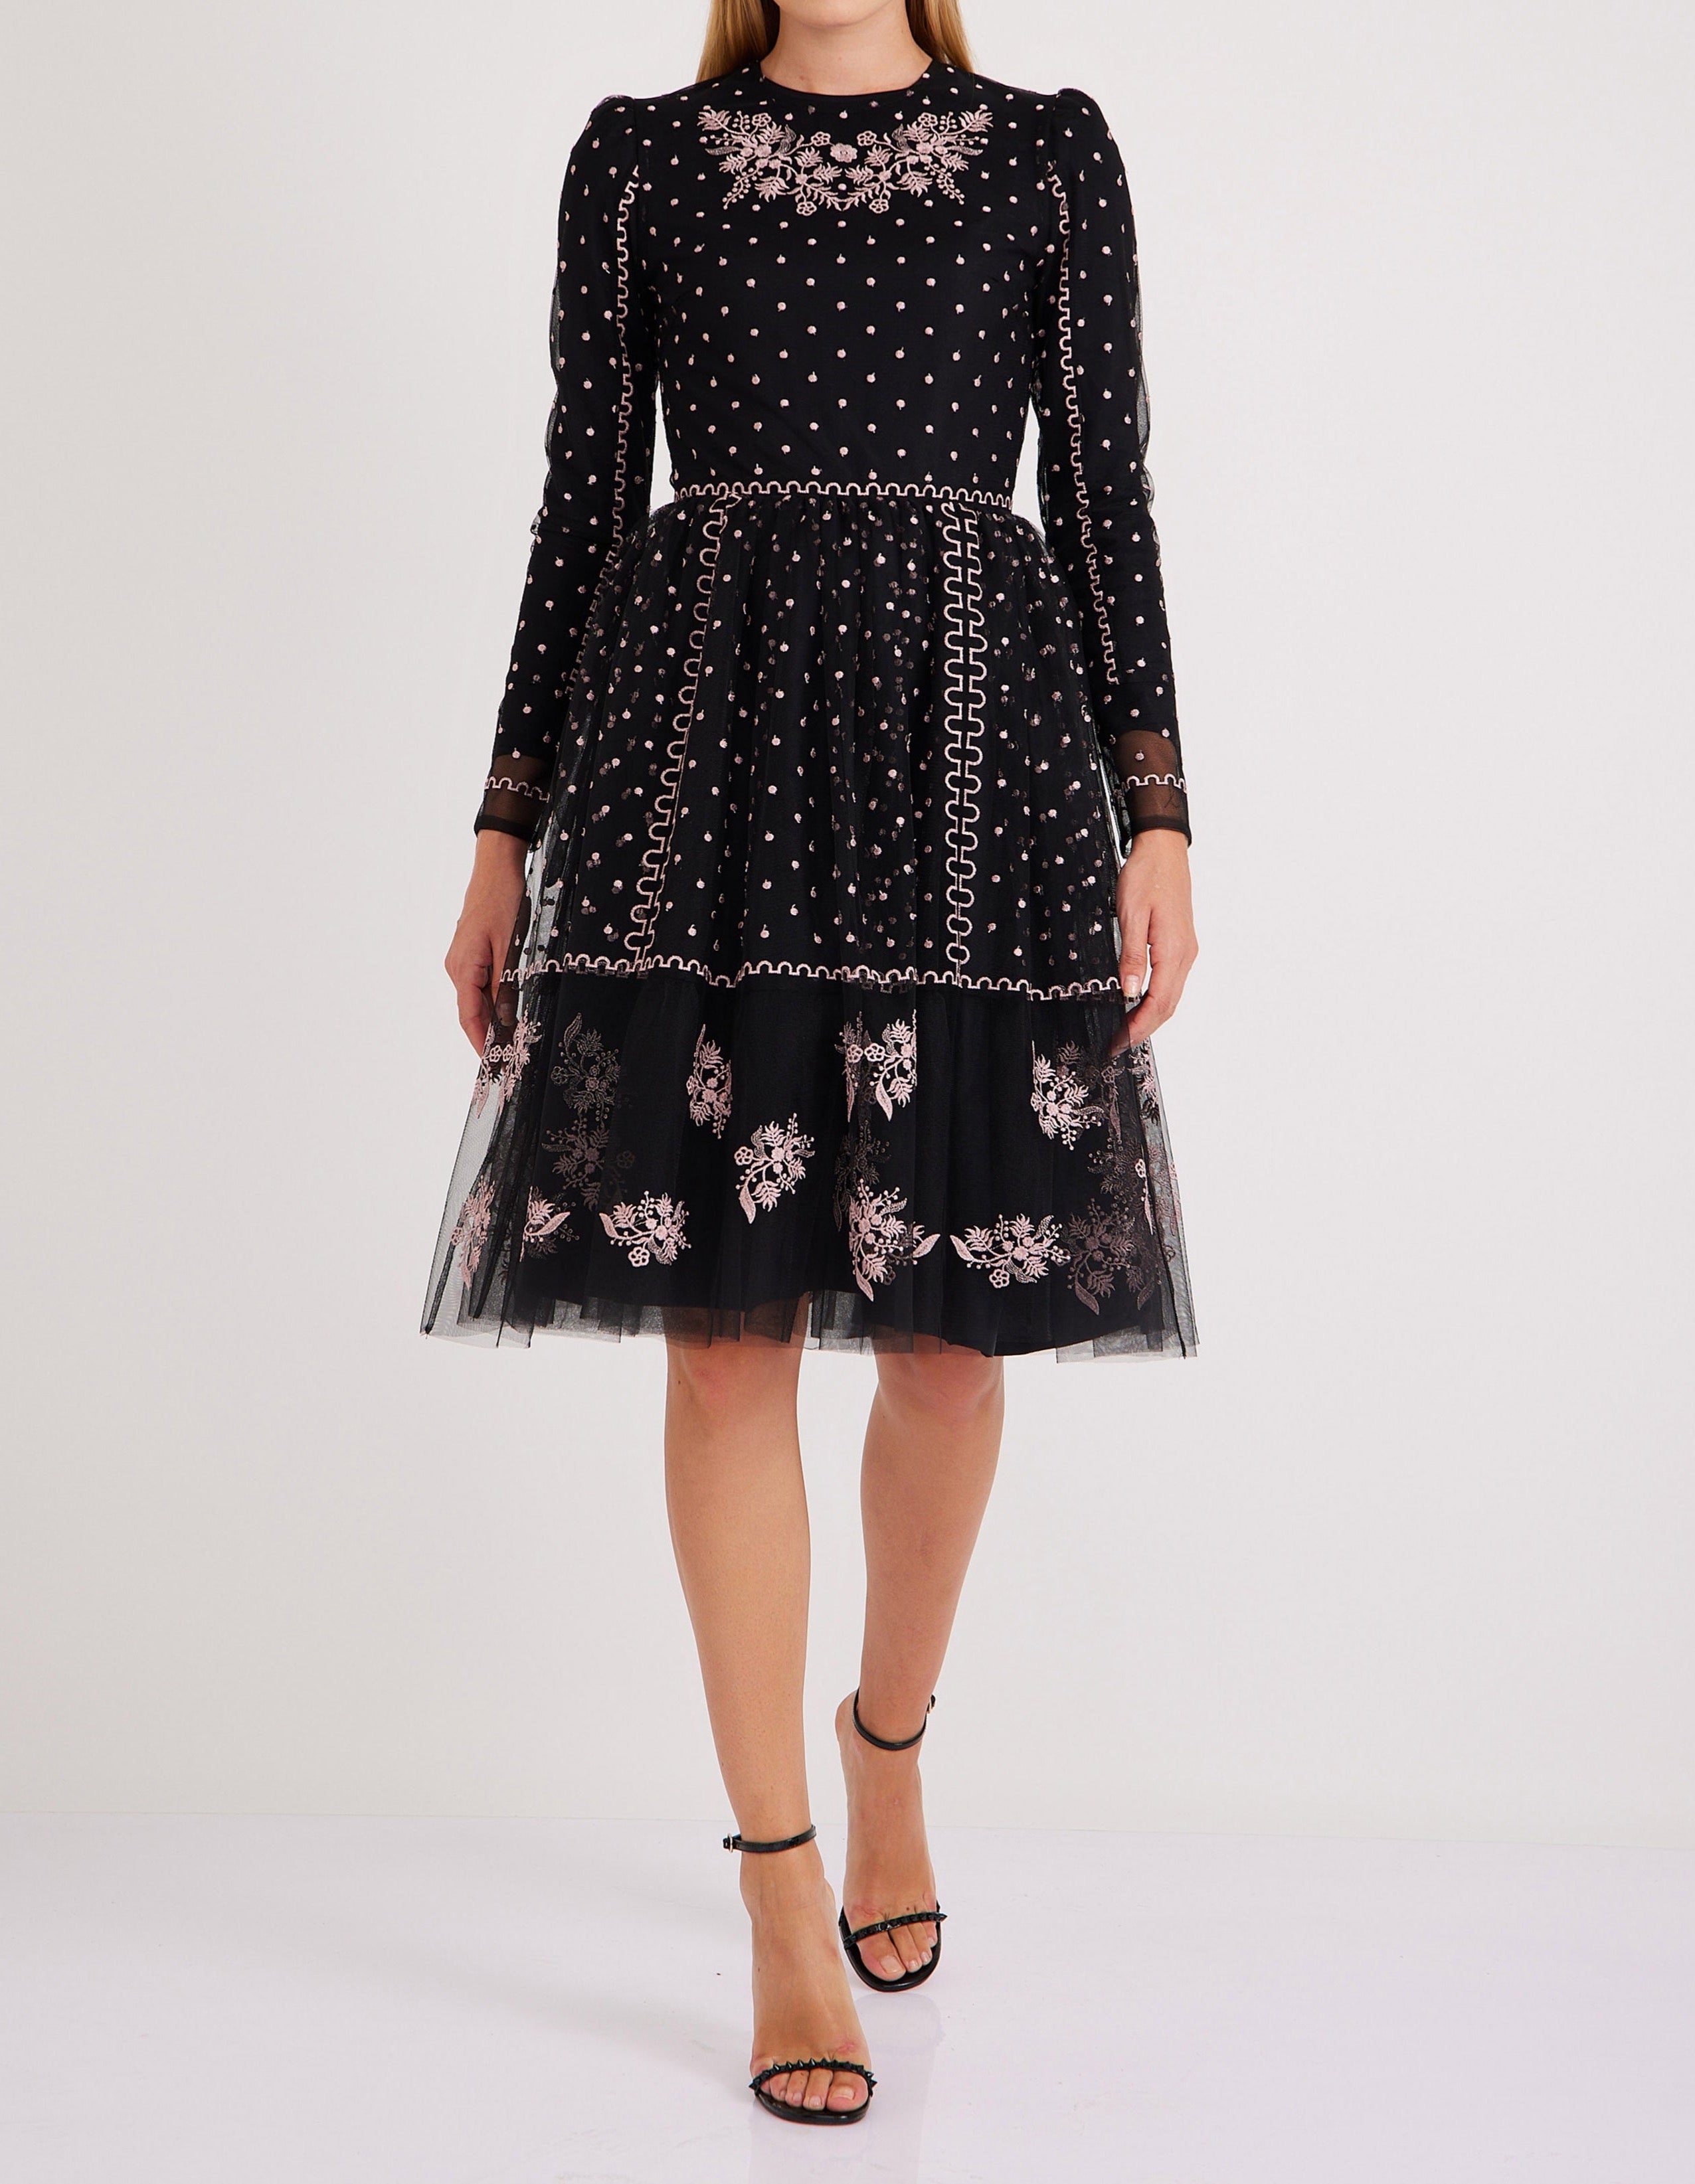 Black Embroidered Dress with Pink Flower Dots and Stripes